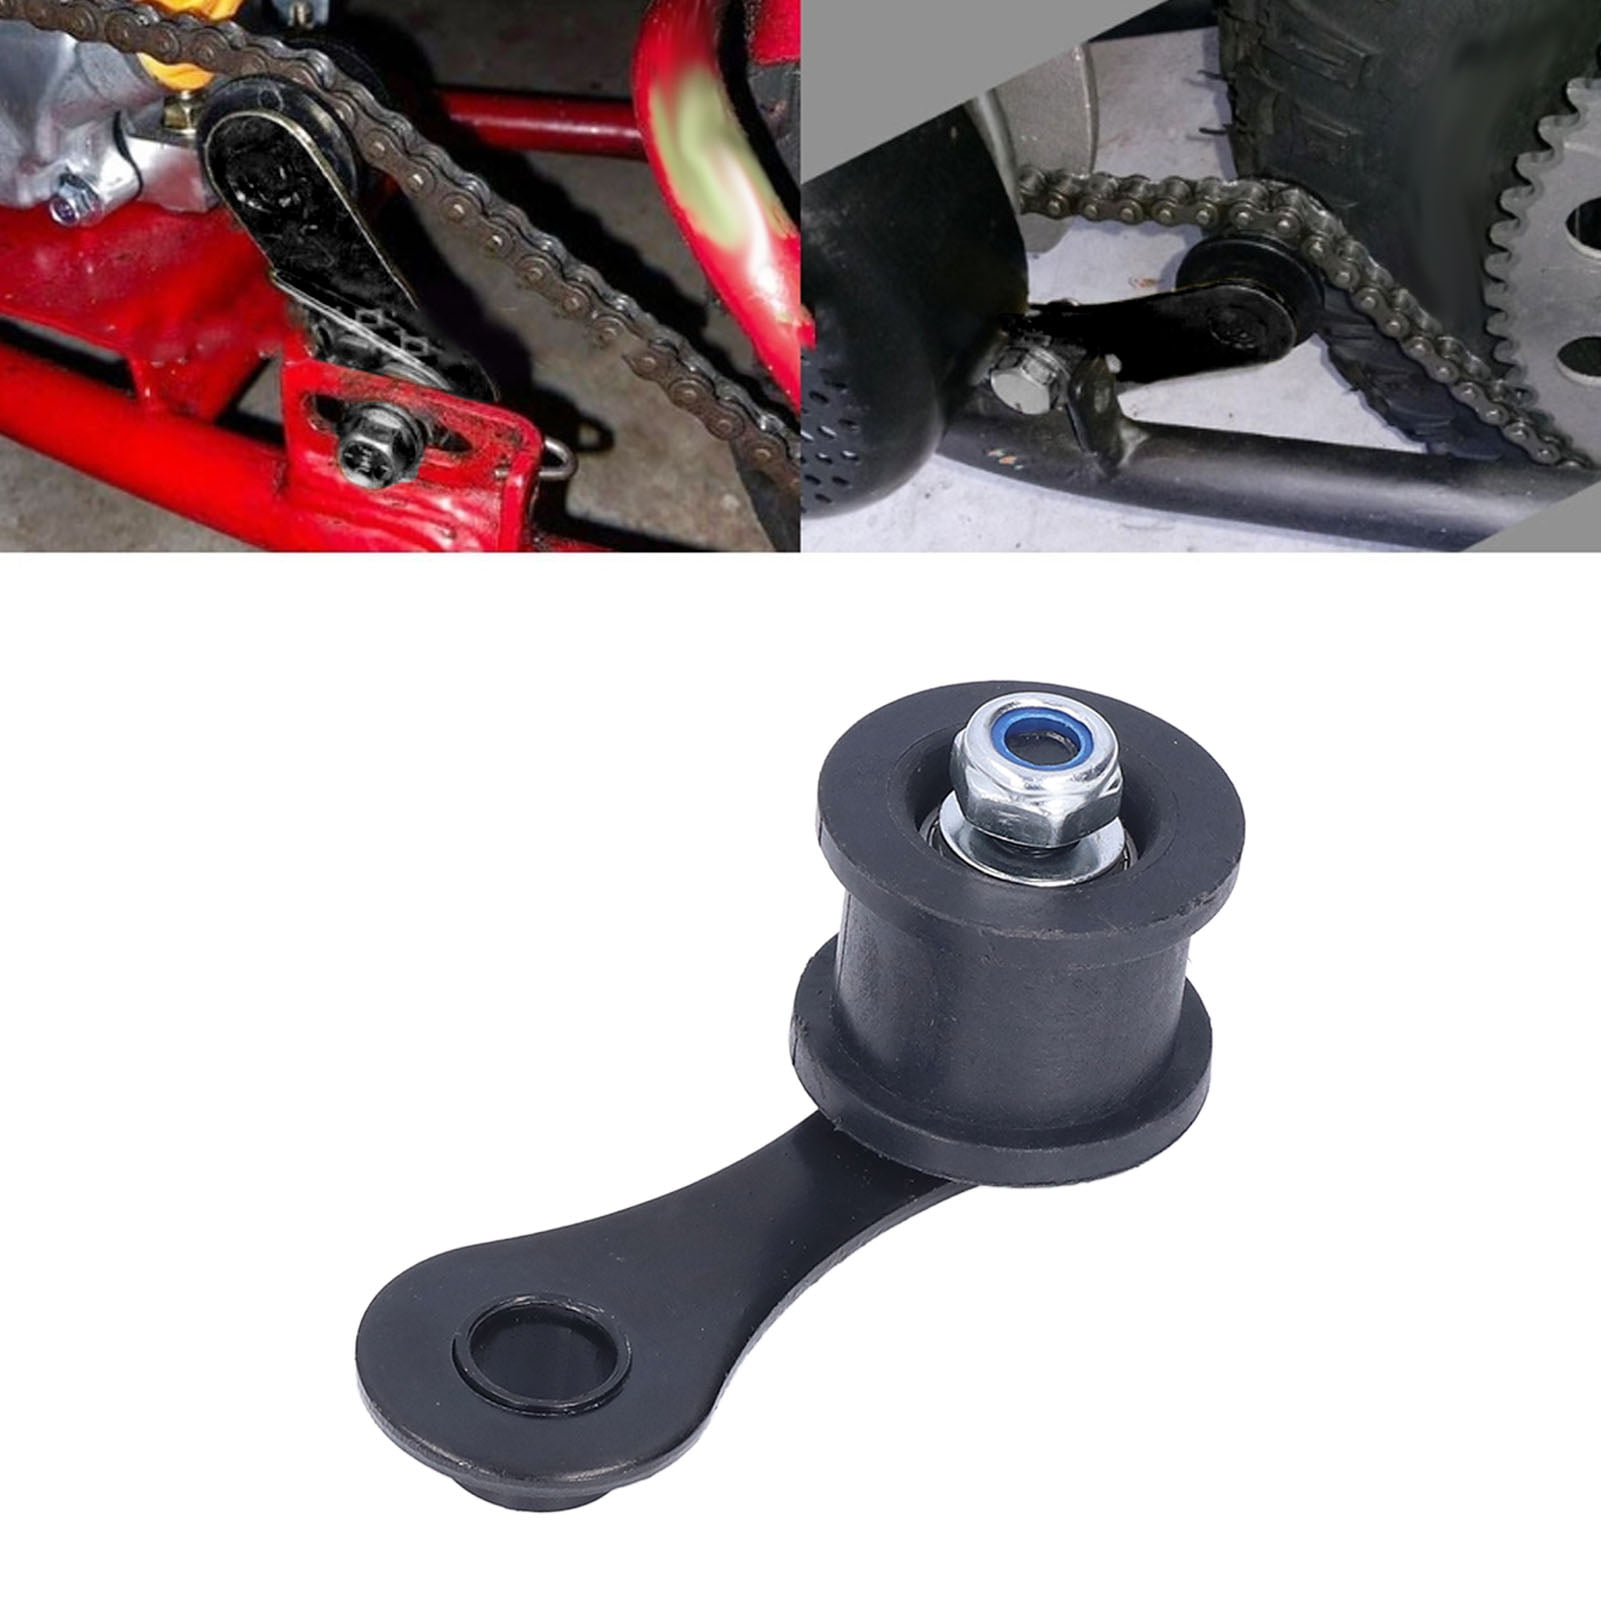 NEW Dirt Bike Chain Tensioner With Spring